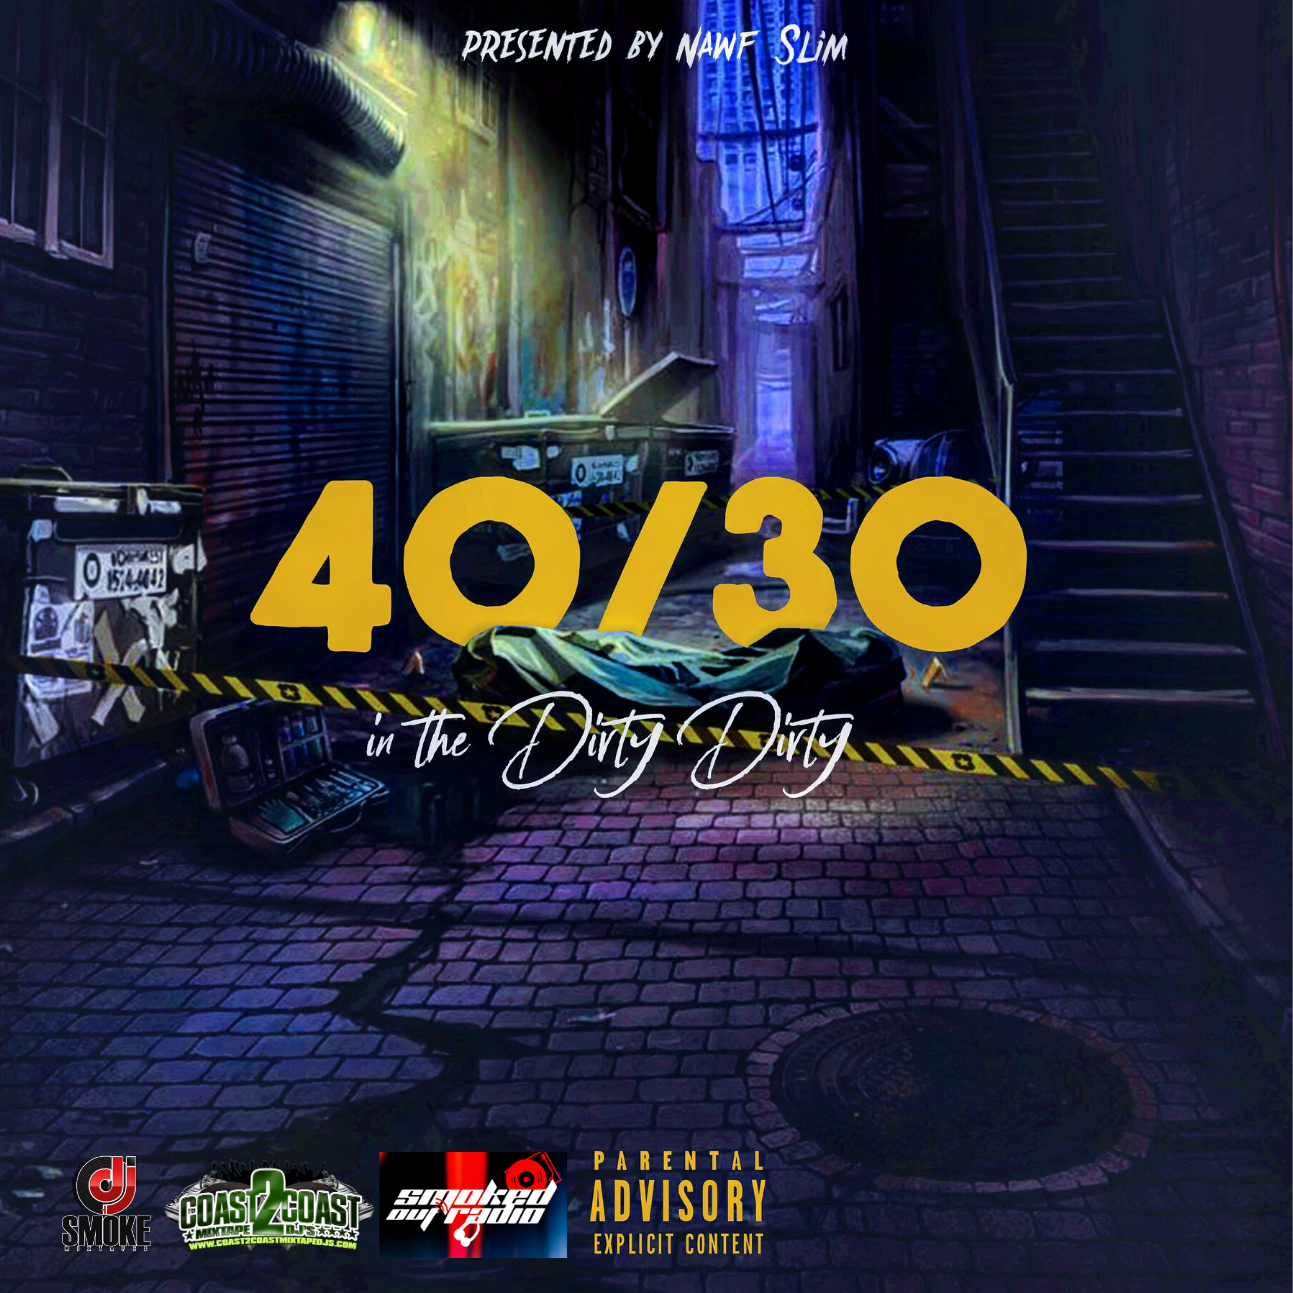 Nawf Slim Presents: 4030 In The Dirty Dirty Hosted by Dj Smoke